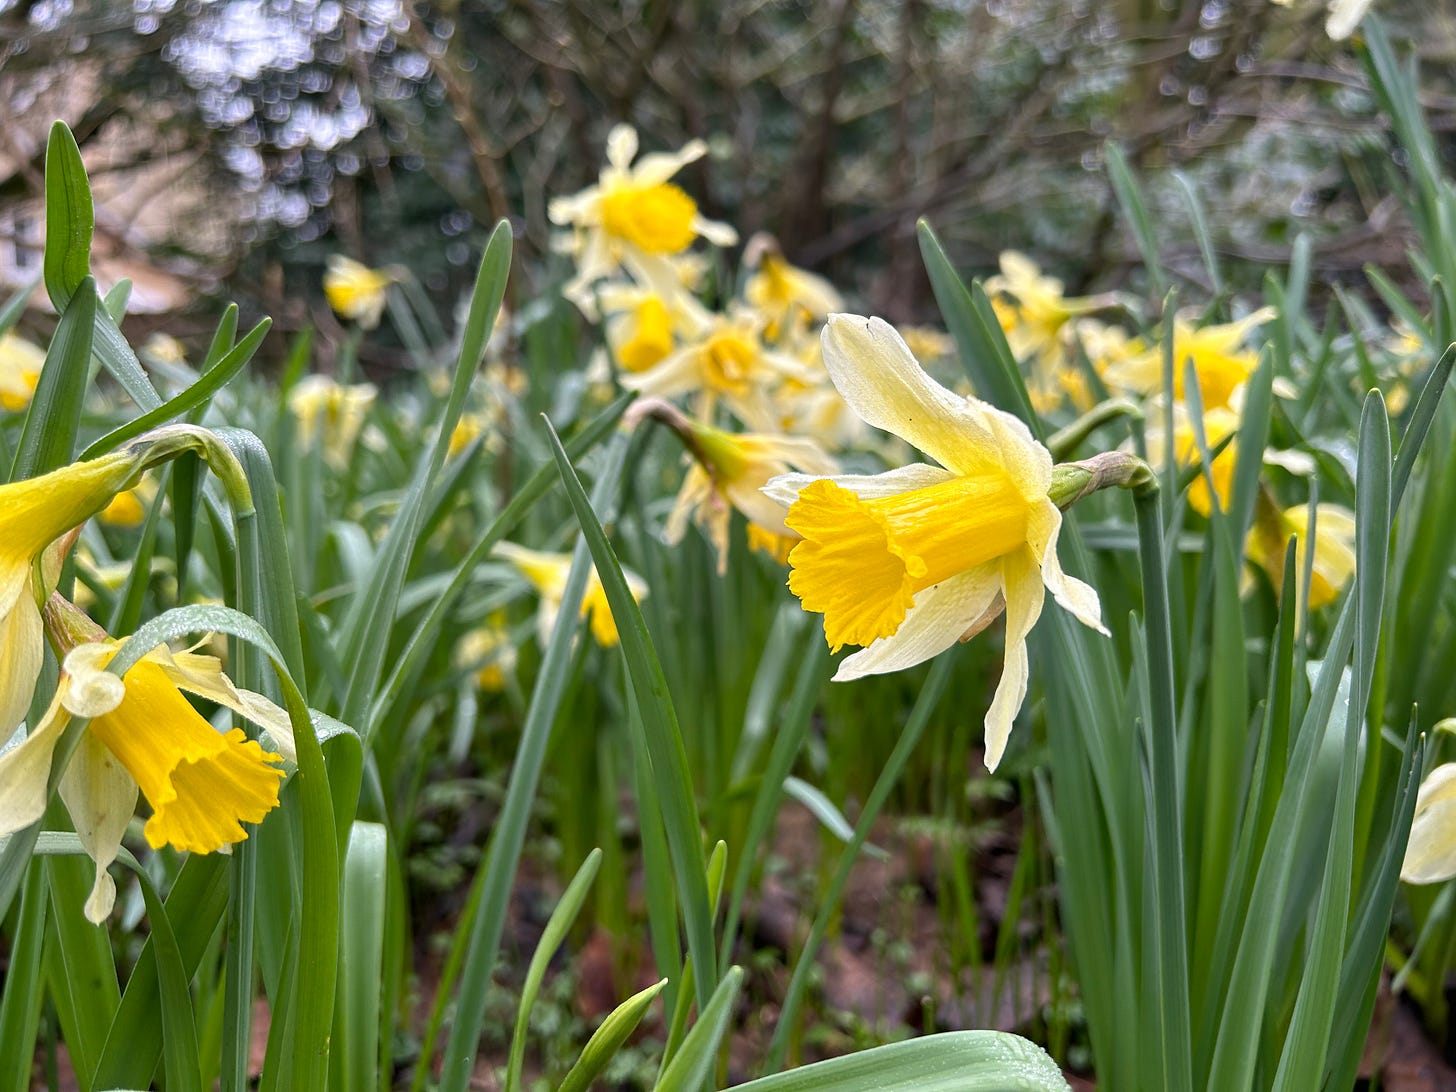 A group of yellow daffodils at The Courts, Holt, Wiltshire. A National Trust property in Wiltshire.